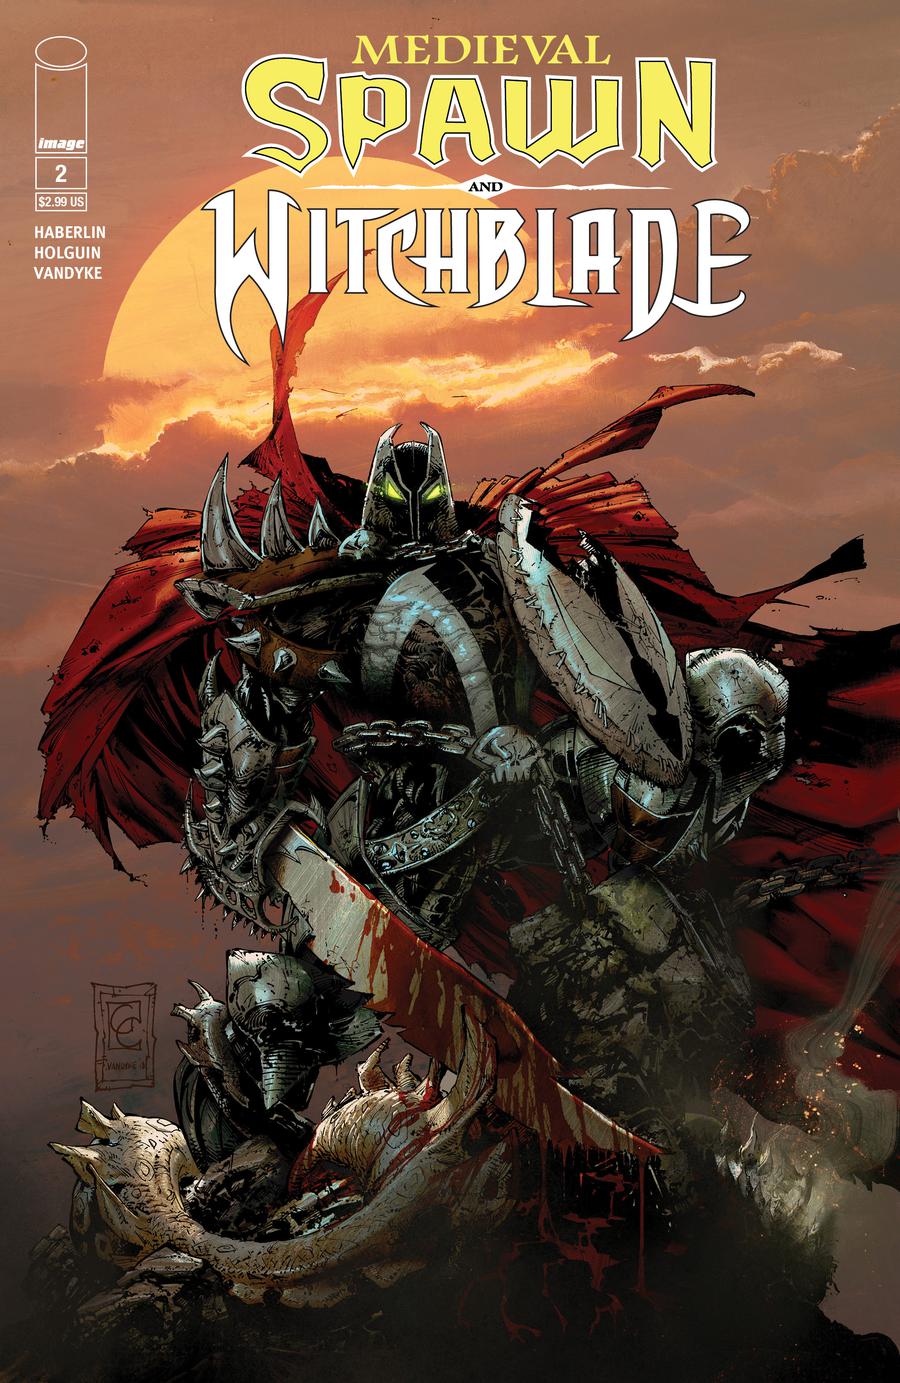 Medieval Spawn Witchblade Vol 2 #2 Cover B Variant Greg Capullo Color Cover